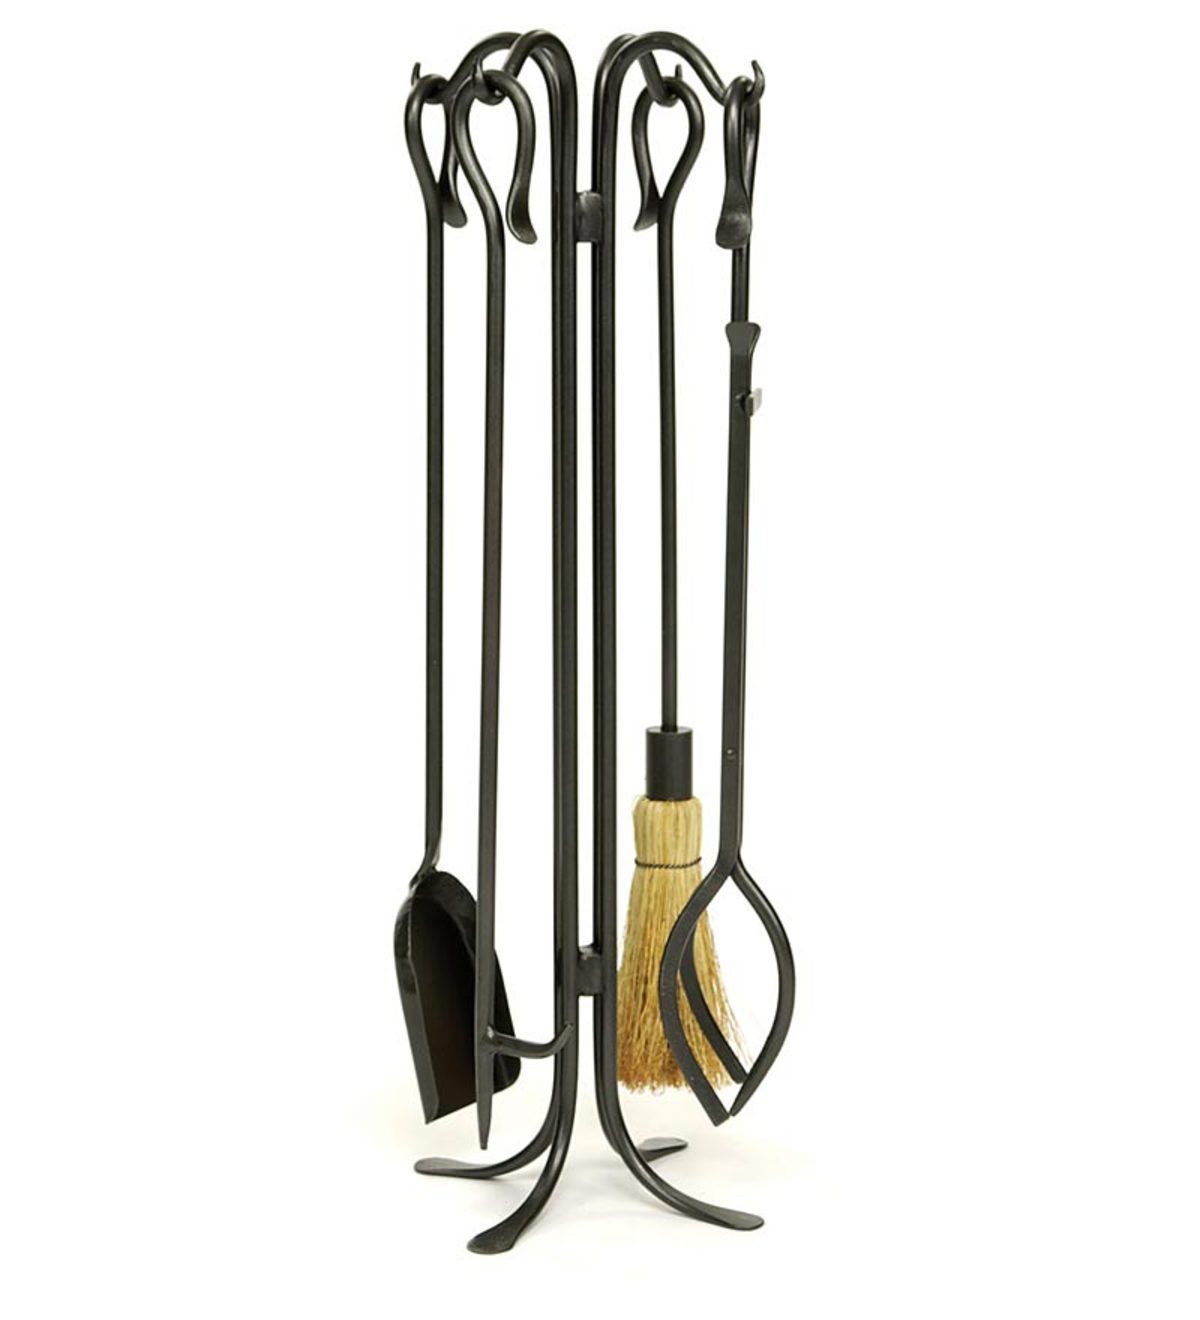 Wrought Iron Hearth Hooks 5-Piece Fireplace Tool Set In Powder